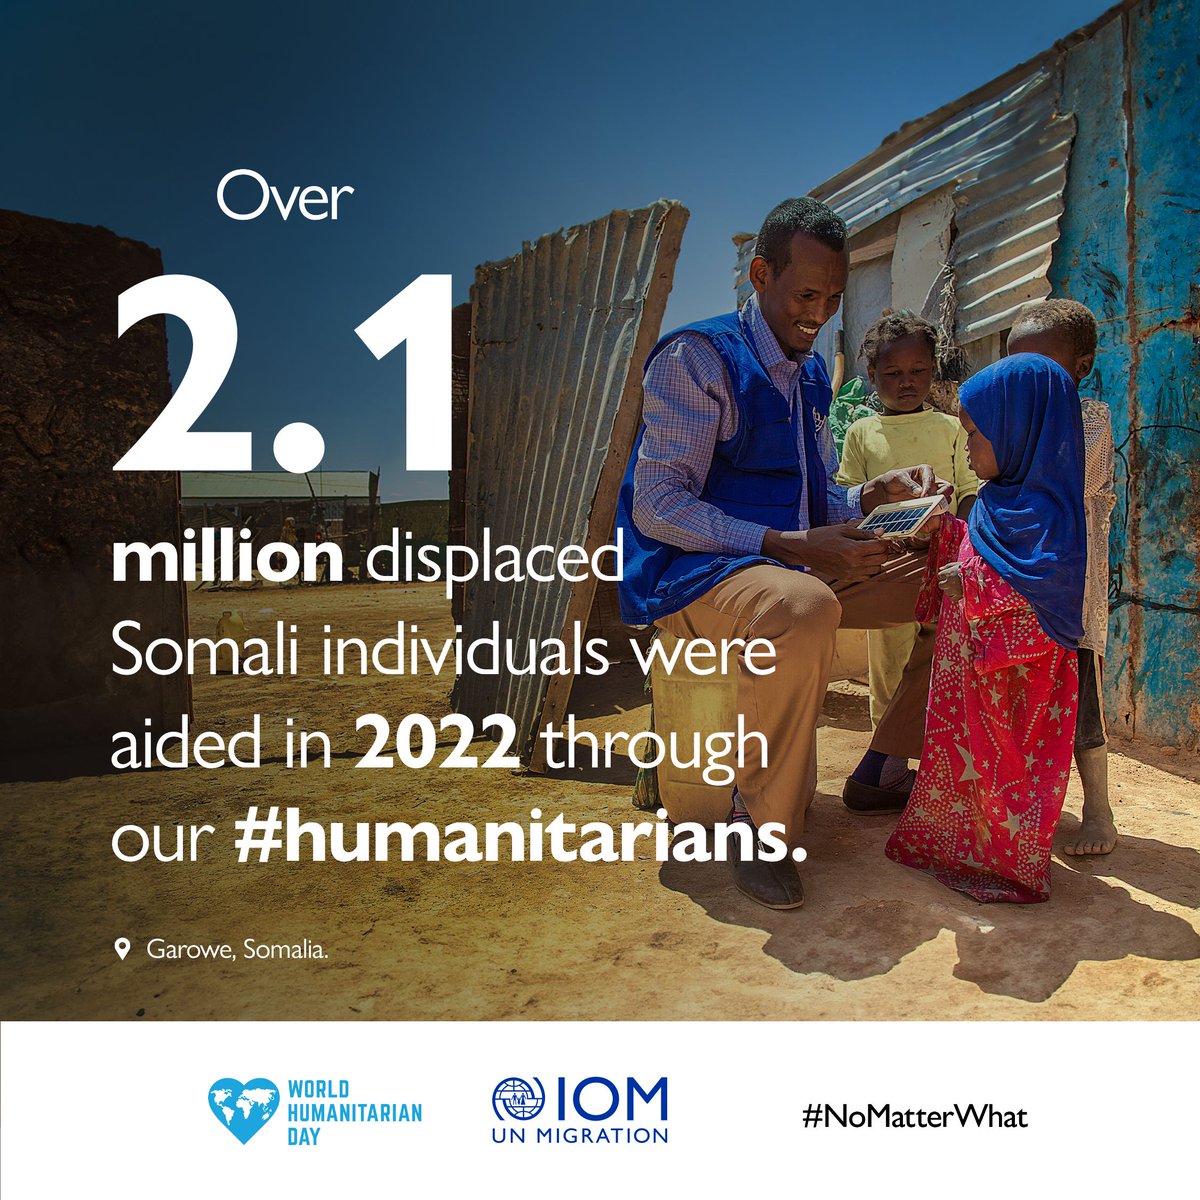 #NoMatterWhat obstacles came their way, our #humanitarians reached over 2 million displaced individuals in Somalia in 2022 alone, lets honor their commitment this #WorldHumanitarianDay.

#WorldHumanitarianDay

#NoMatterWhat

#NoMatterWho

#NoMatterTheHardship

#NoMatterWhere